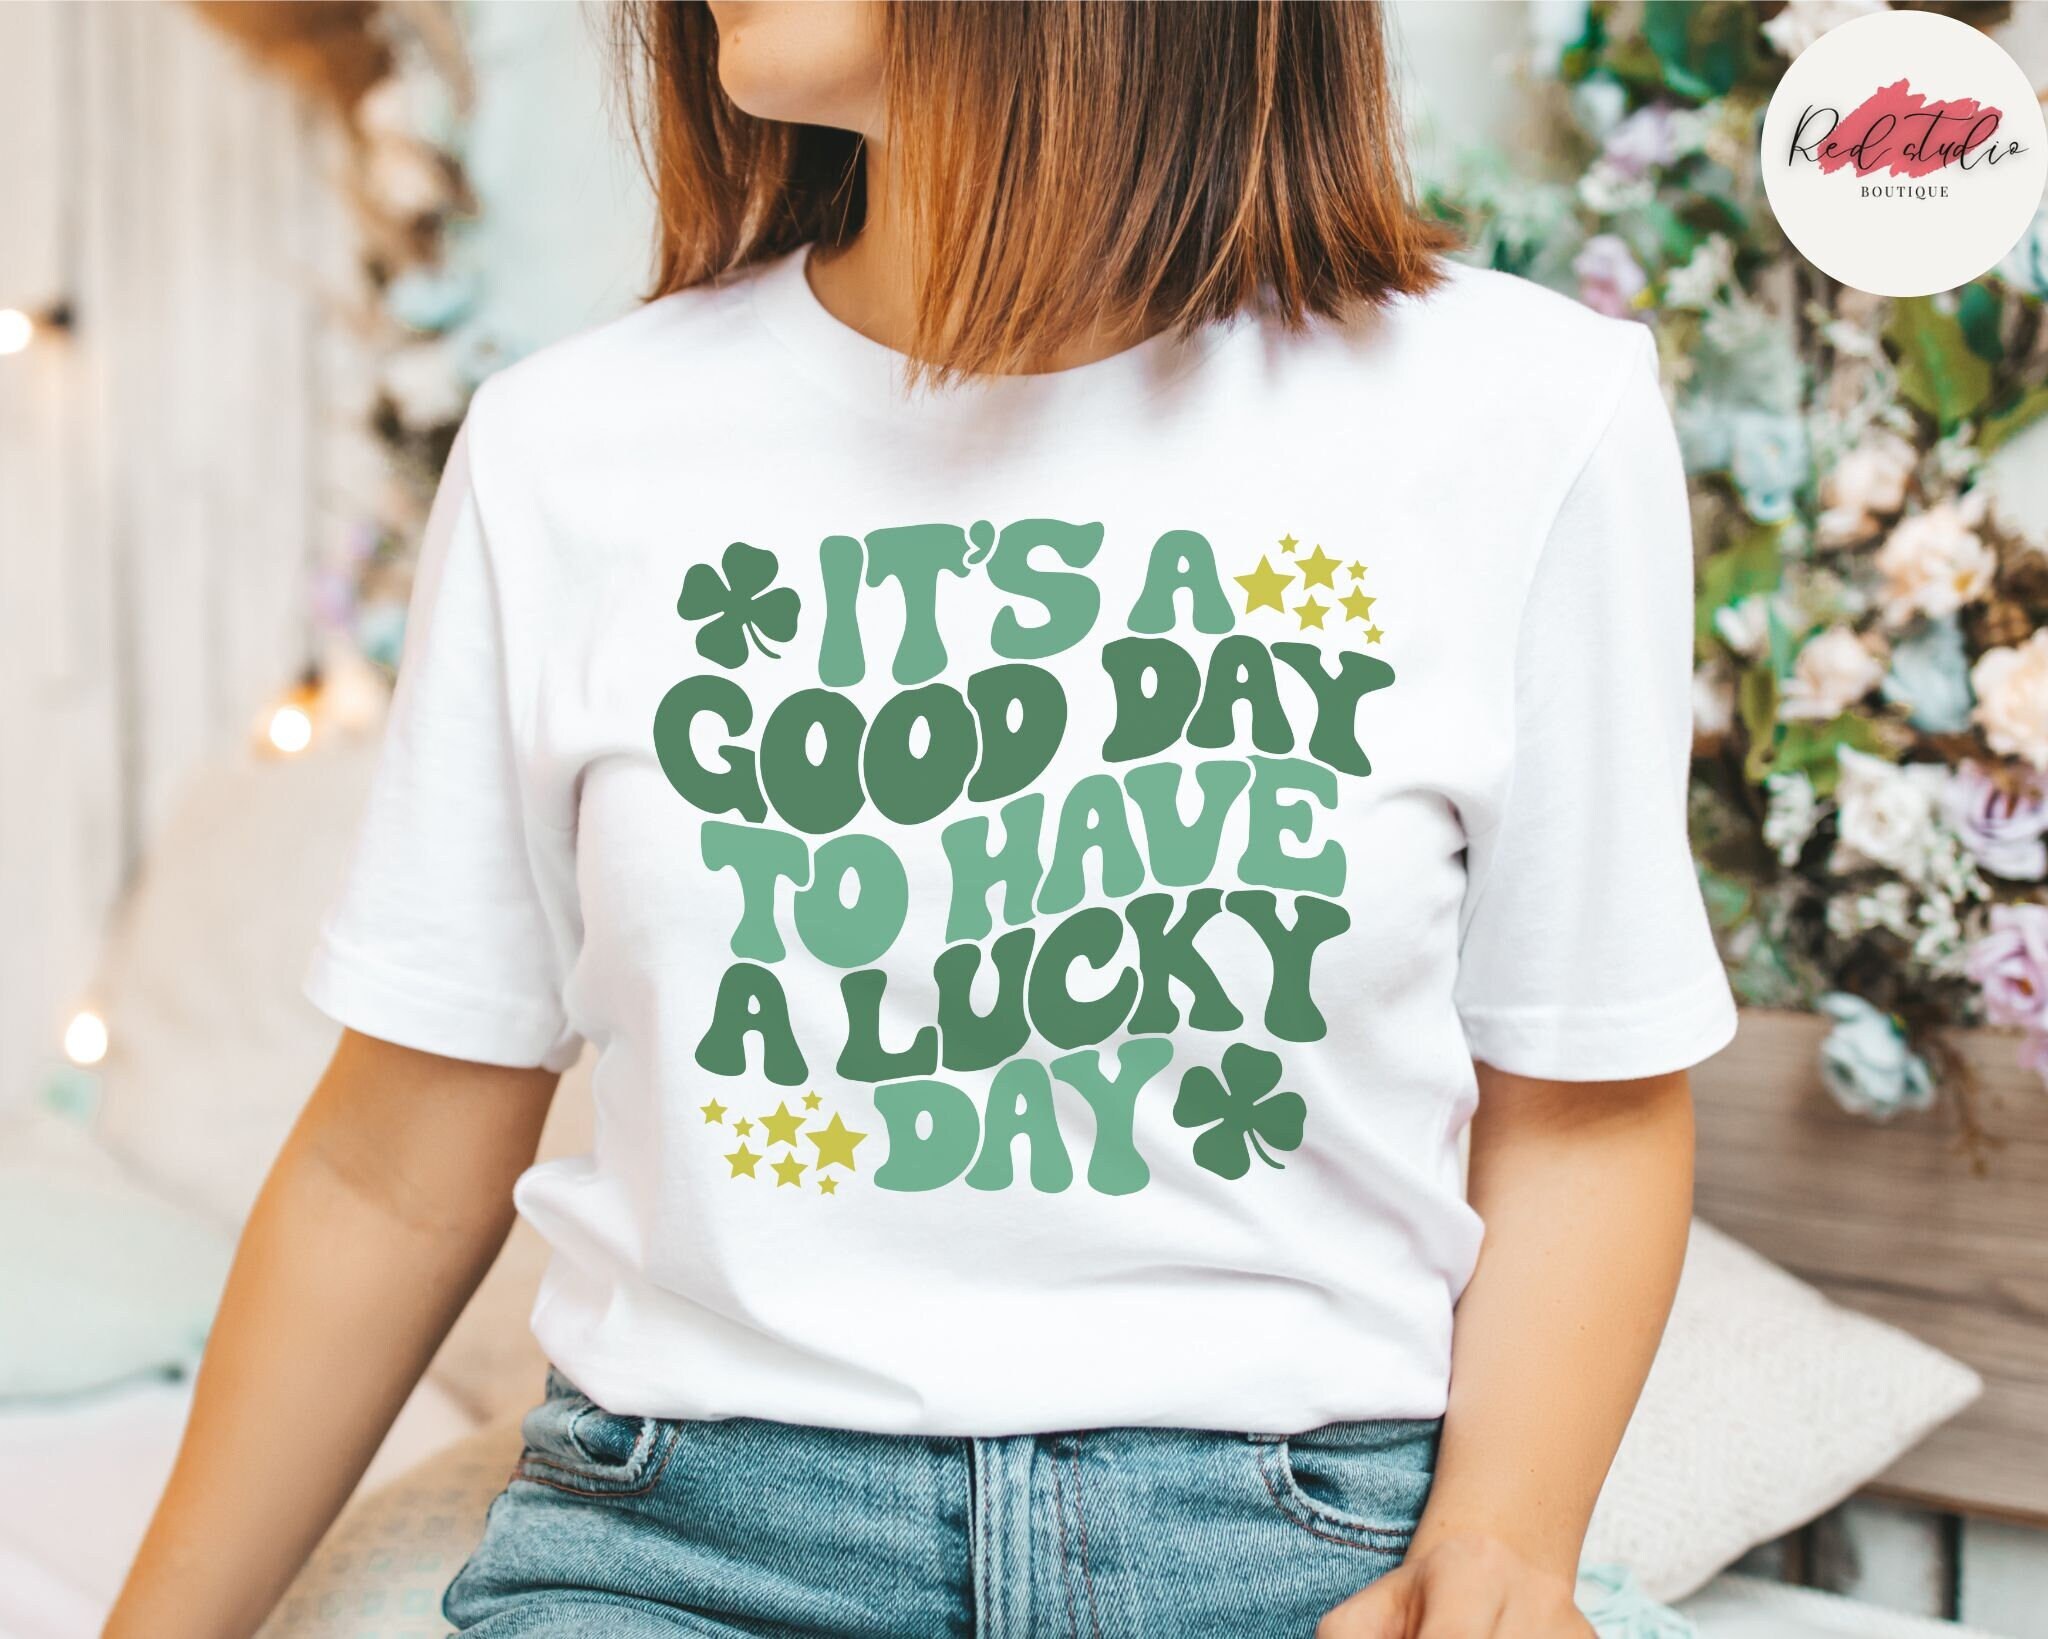 It's A Good Day To Have A Lucky Day Shirt, Retro Shirt, Lucky Shirt